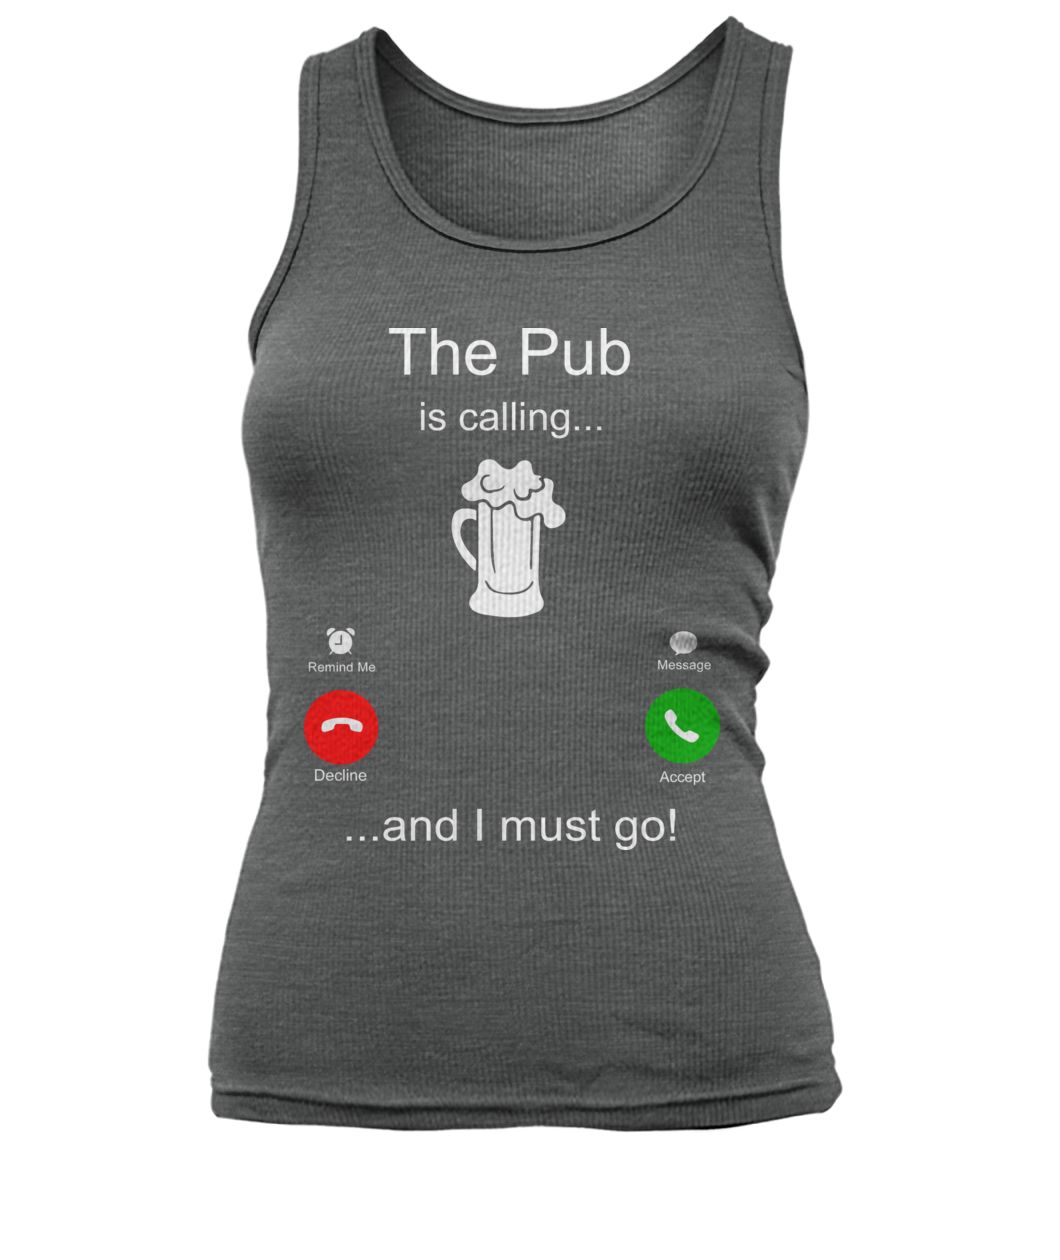 The Pub is calling and I must go women's tank top